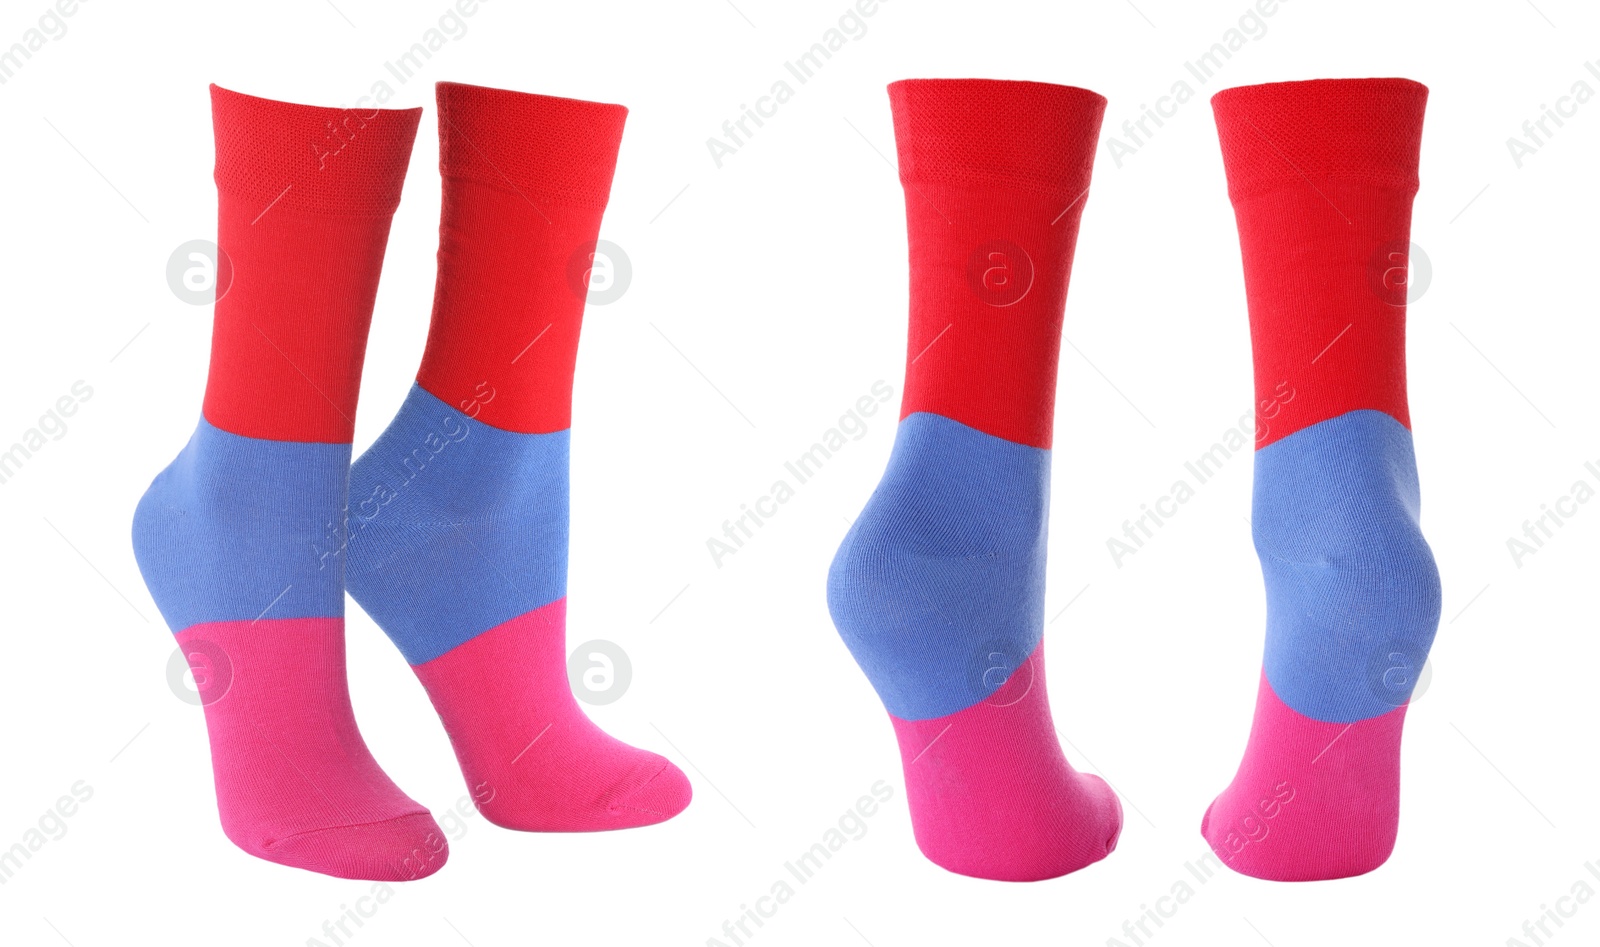 Image of Pairs of bright socks on white background, collage